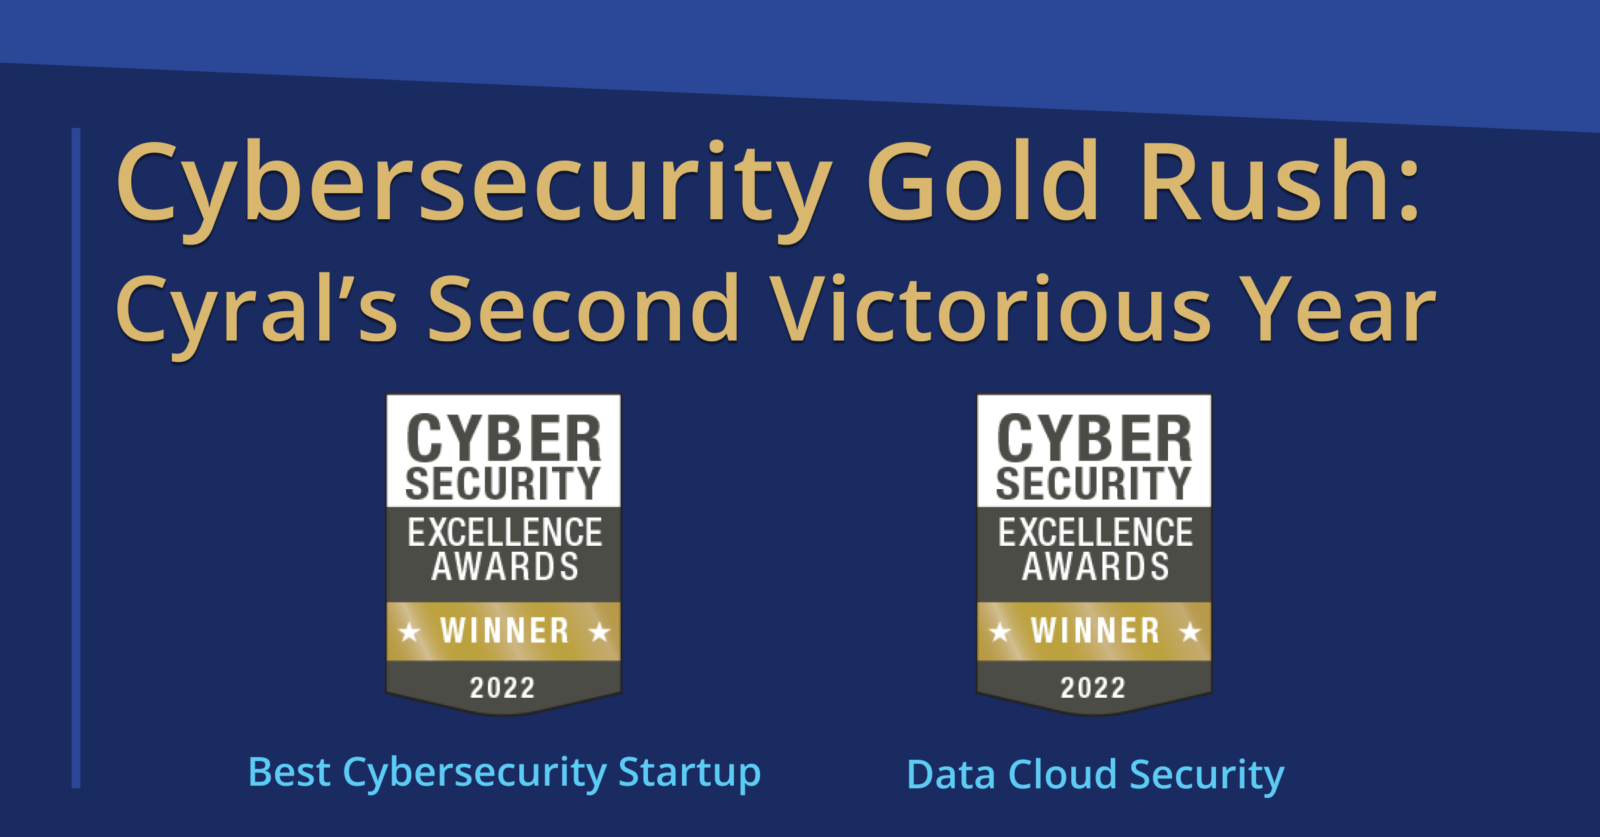 Cyber Security Excellence Awards 2022 - Cyral Wins Gold Blog